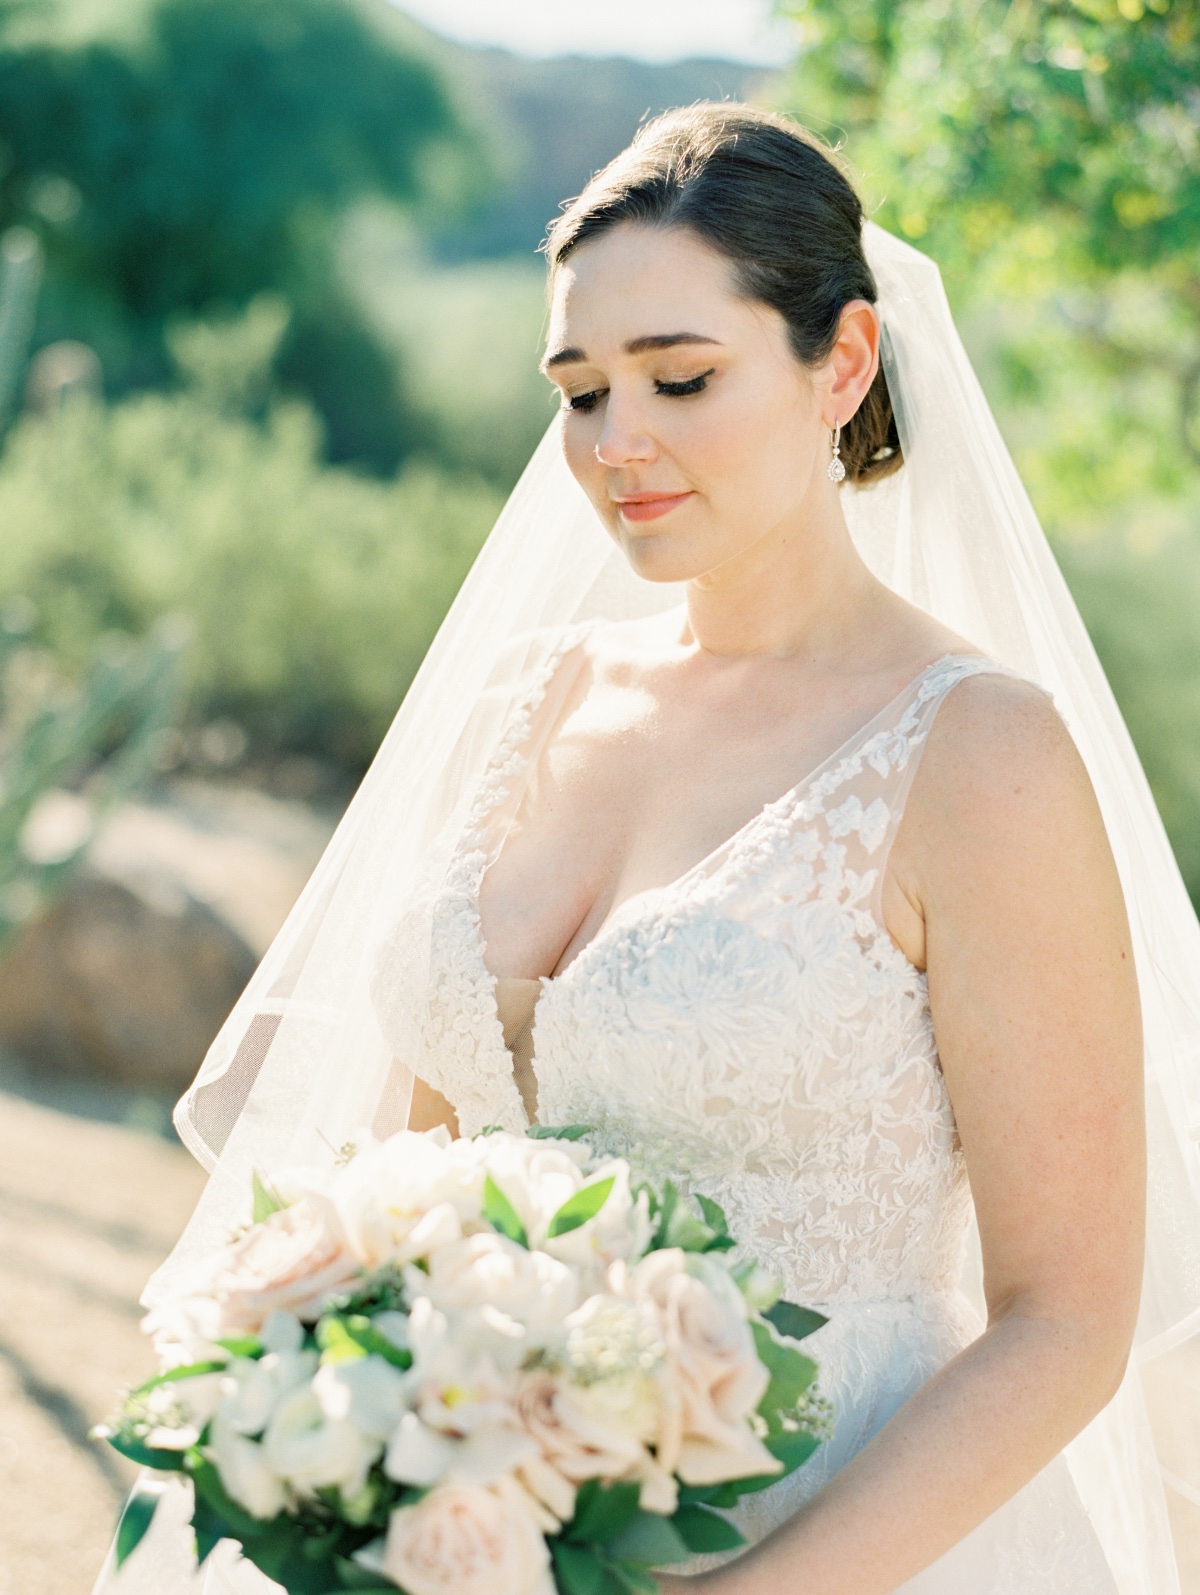 Can't Decide Between A Church Wedding And An Outdoor CeremonyâYou Don't Have To